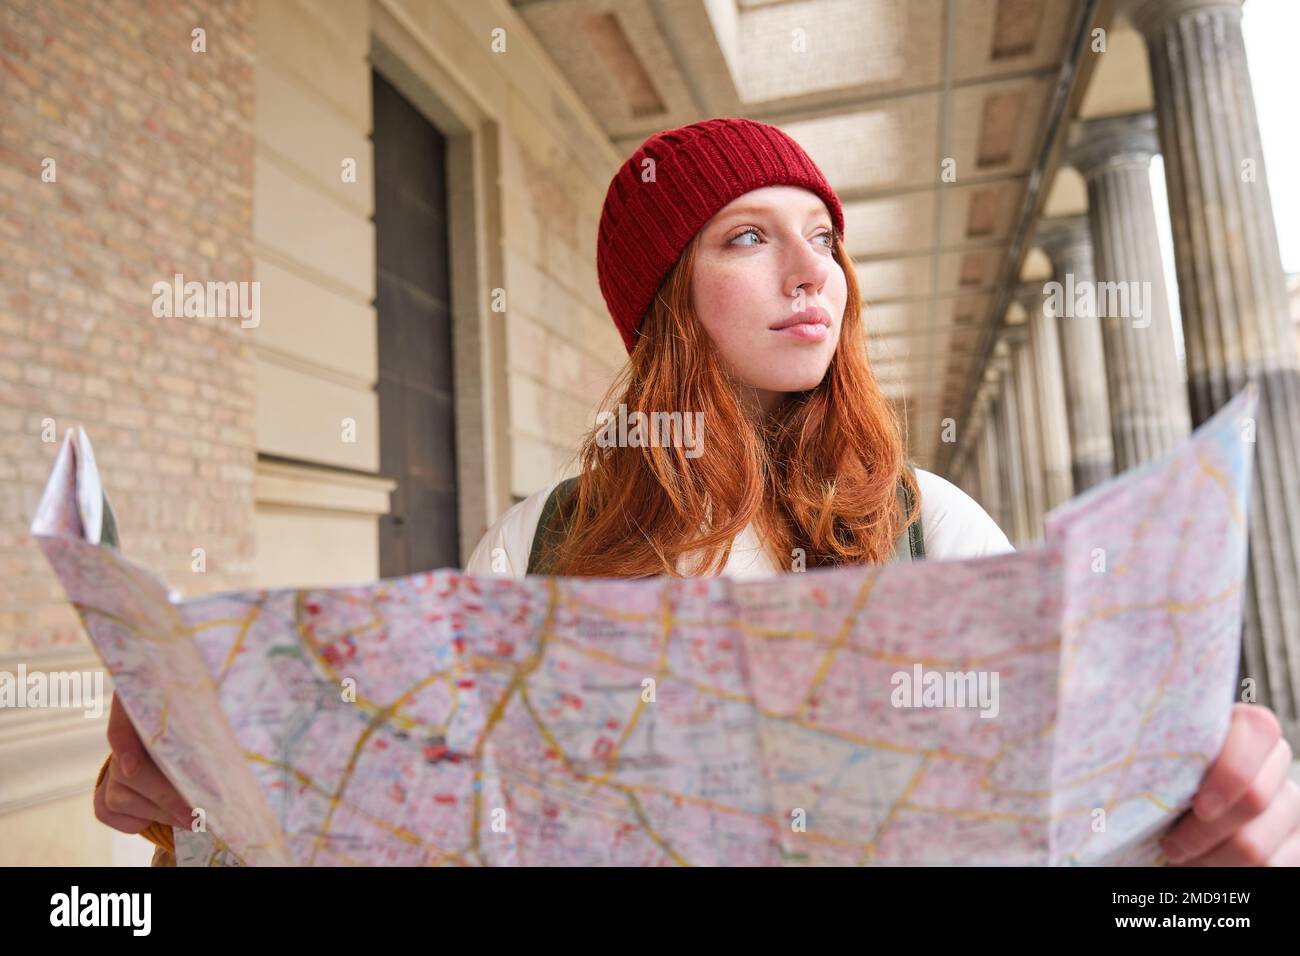 Smiling young redhead woman in red hat, looks at paper map to look for tourist attraction. Tourism and people concept. Girl explores city, tried to Stock Photo